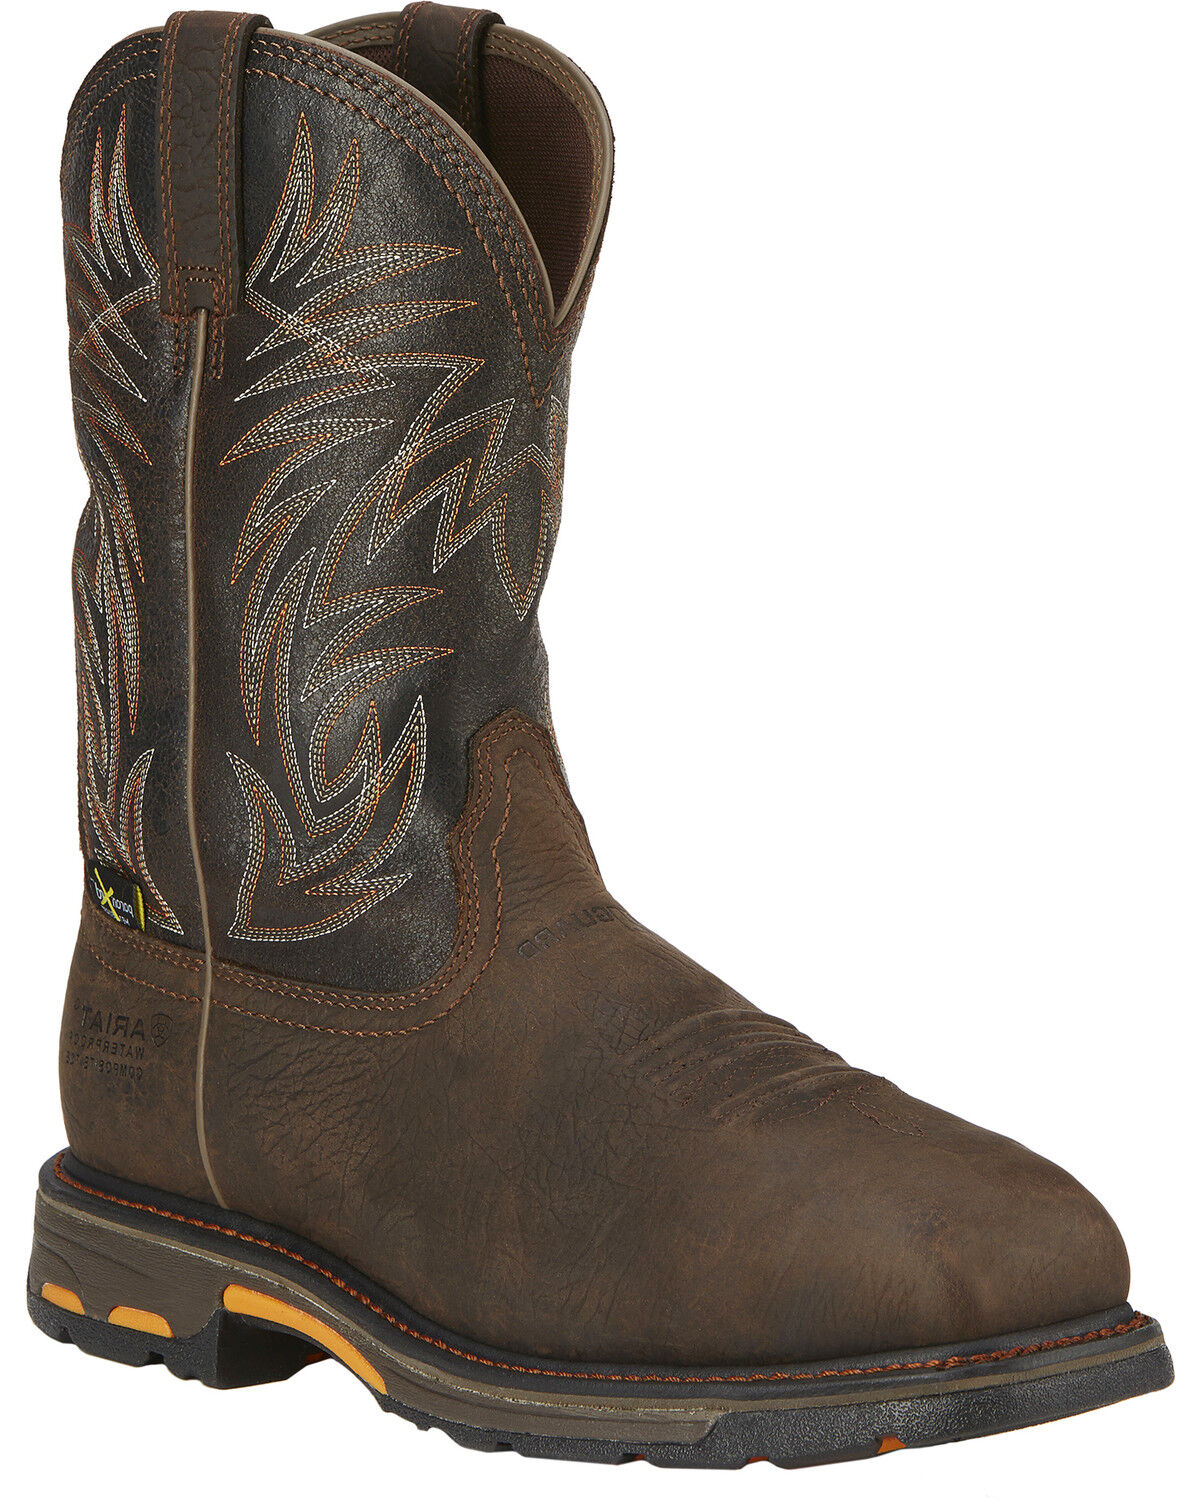 ariat rigger boots